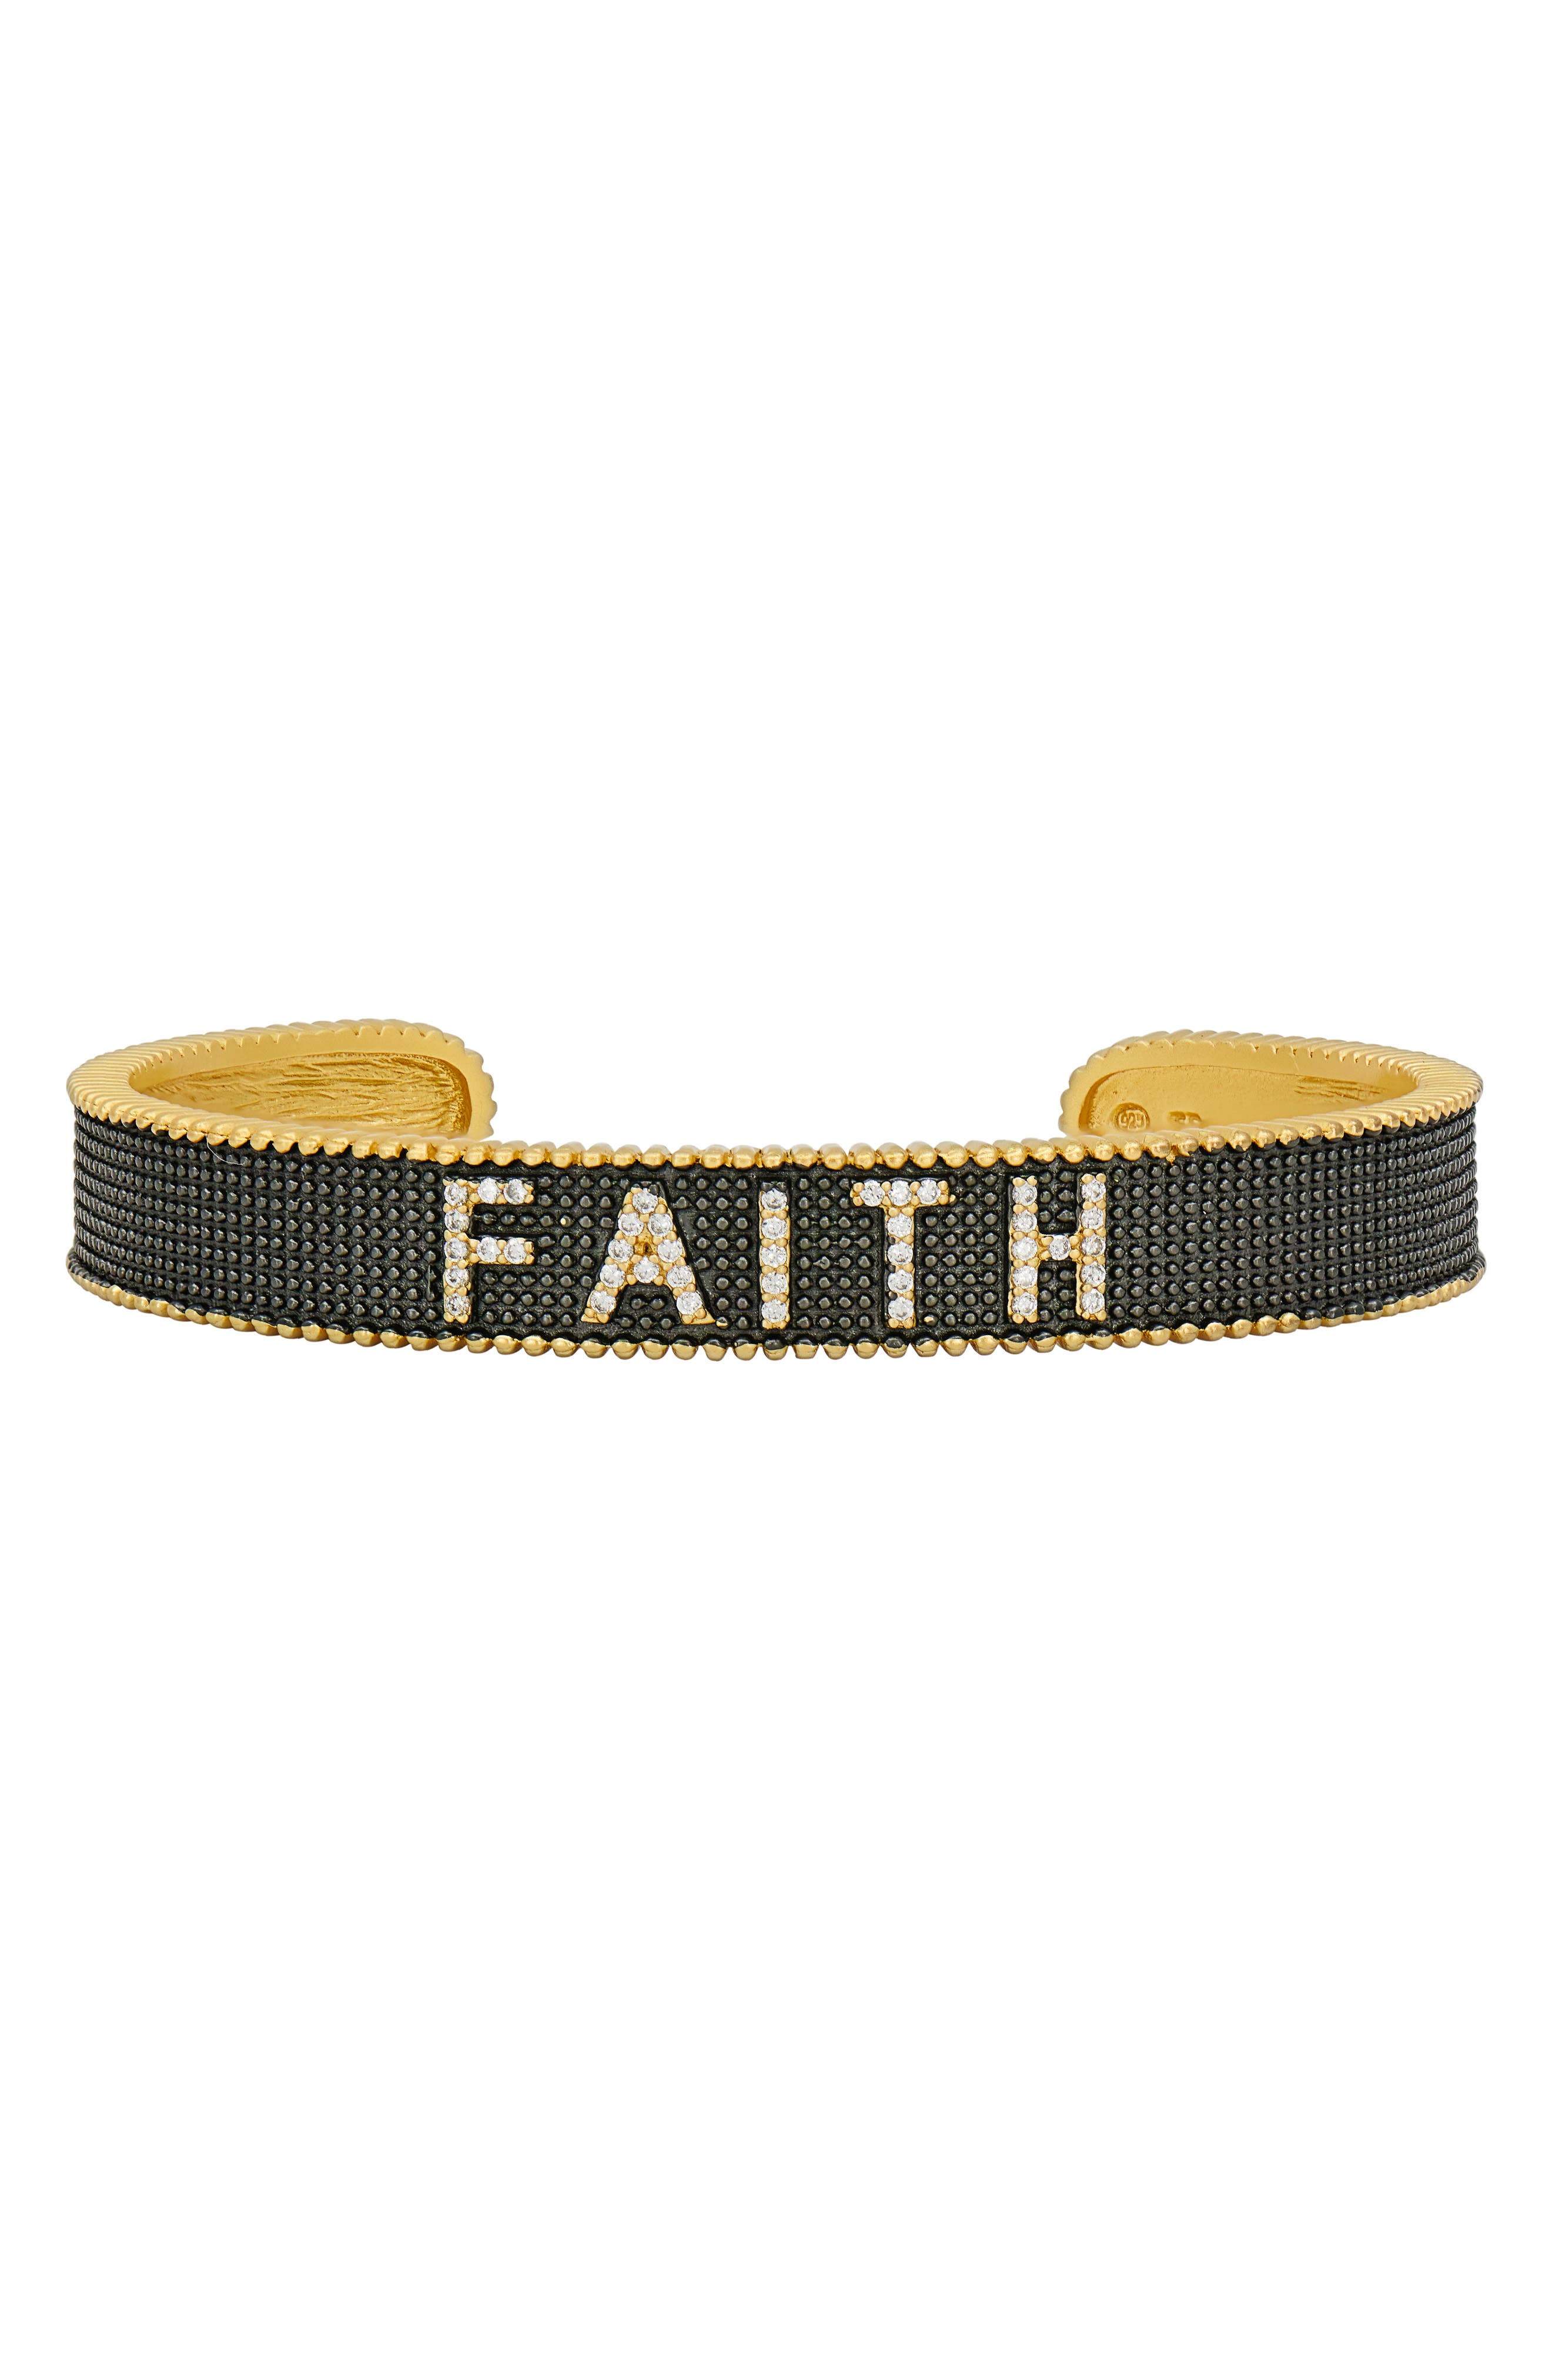 FREIDA ROTHMAN Pave Faith Cuff Bracelet in Gold And Black at Nordstrom -  YRZB080219B